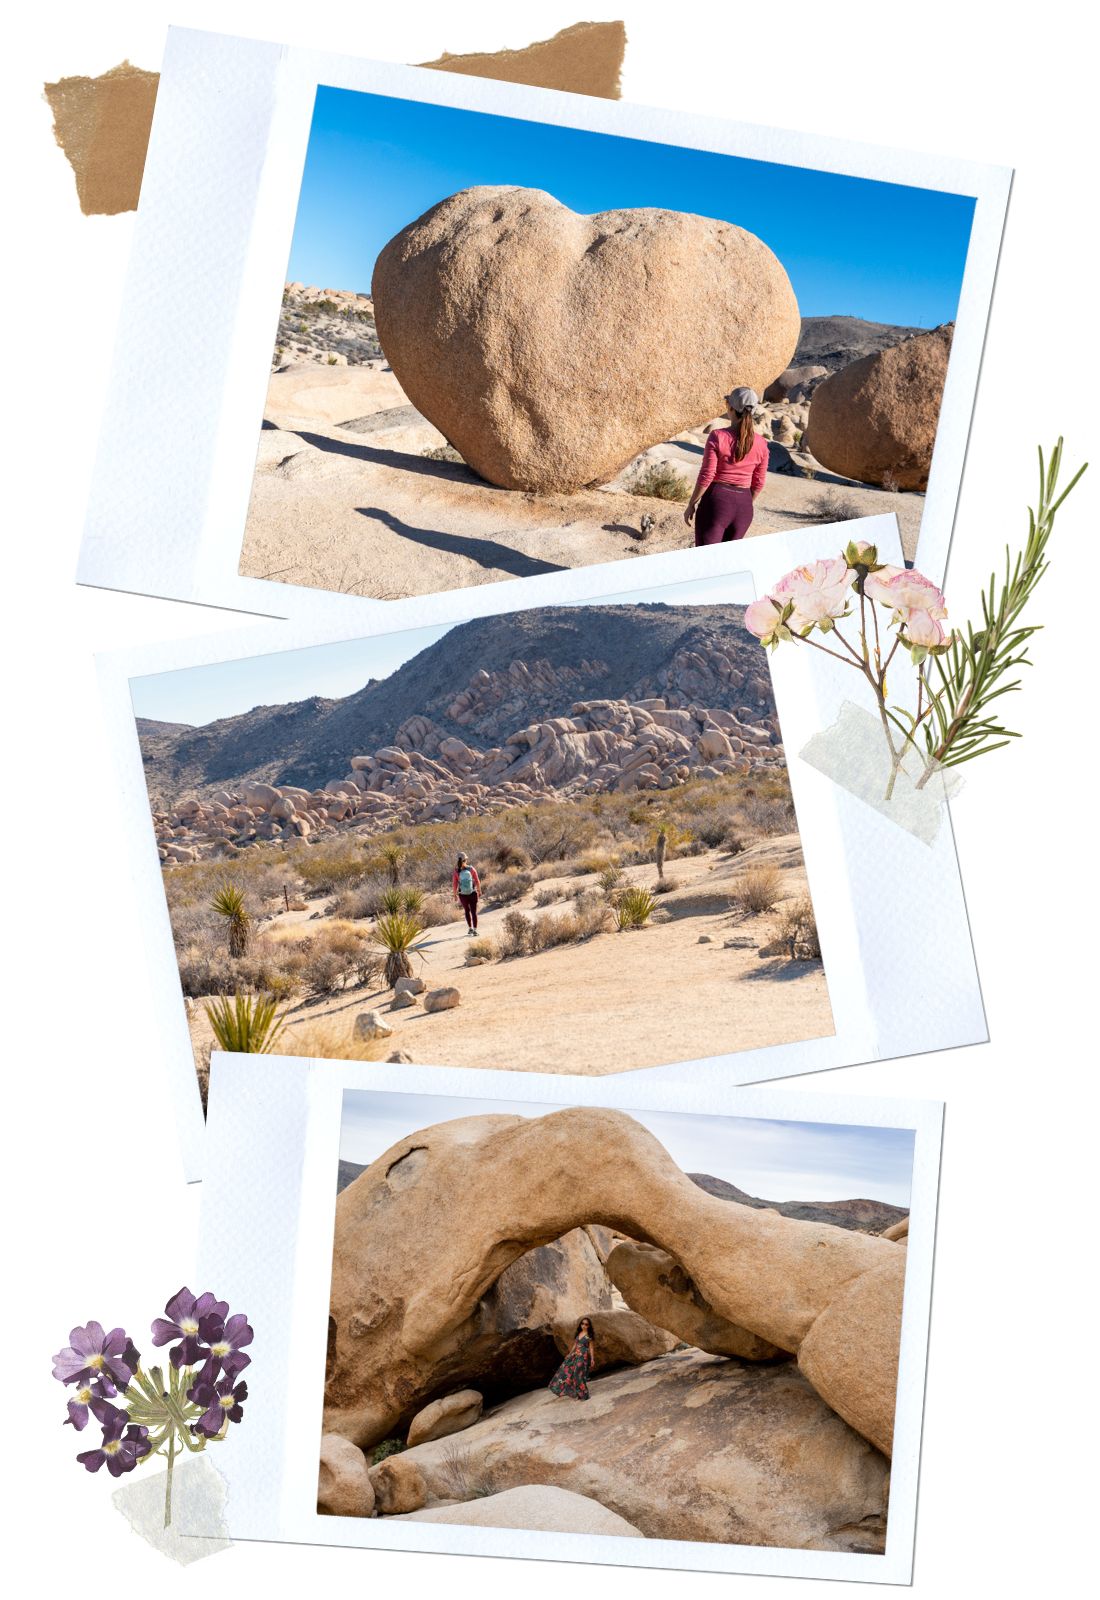 Arch & Heart Rocks - 7 Easy, Yet Awesome Trails in Joshua Tree National Park